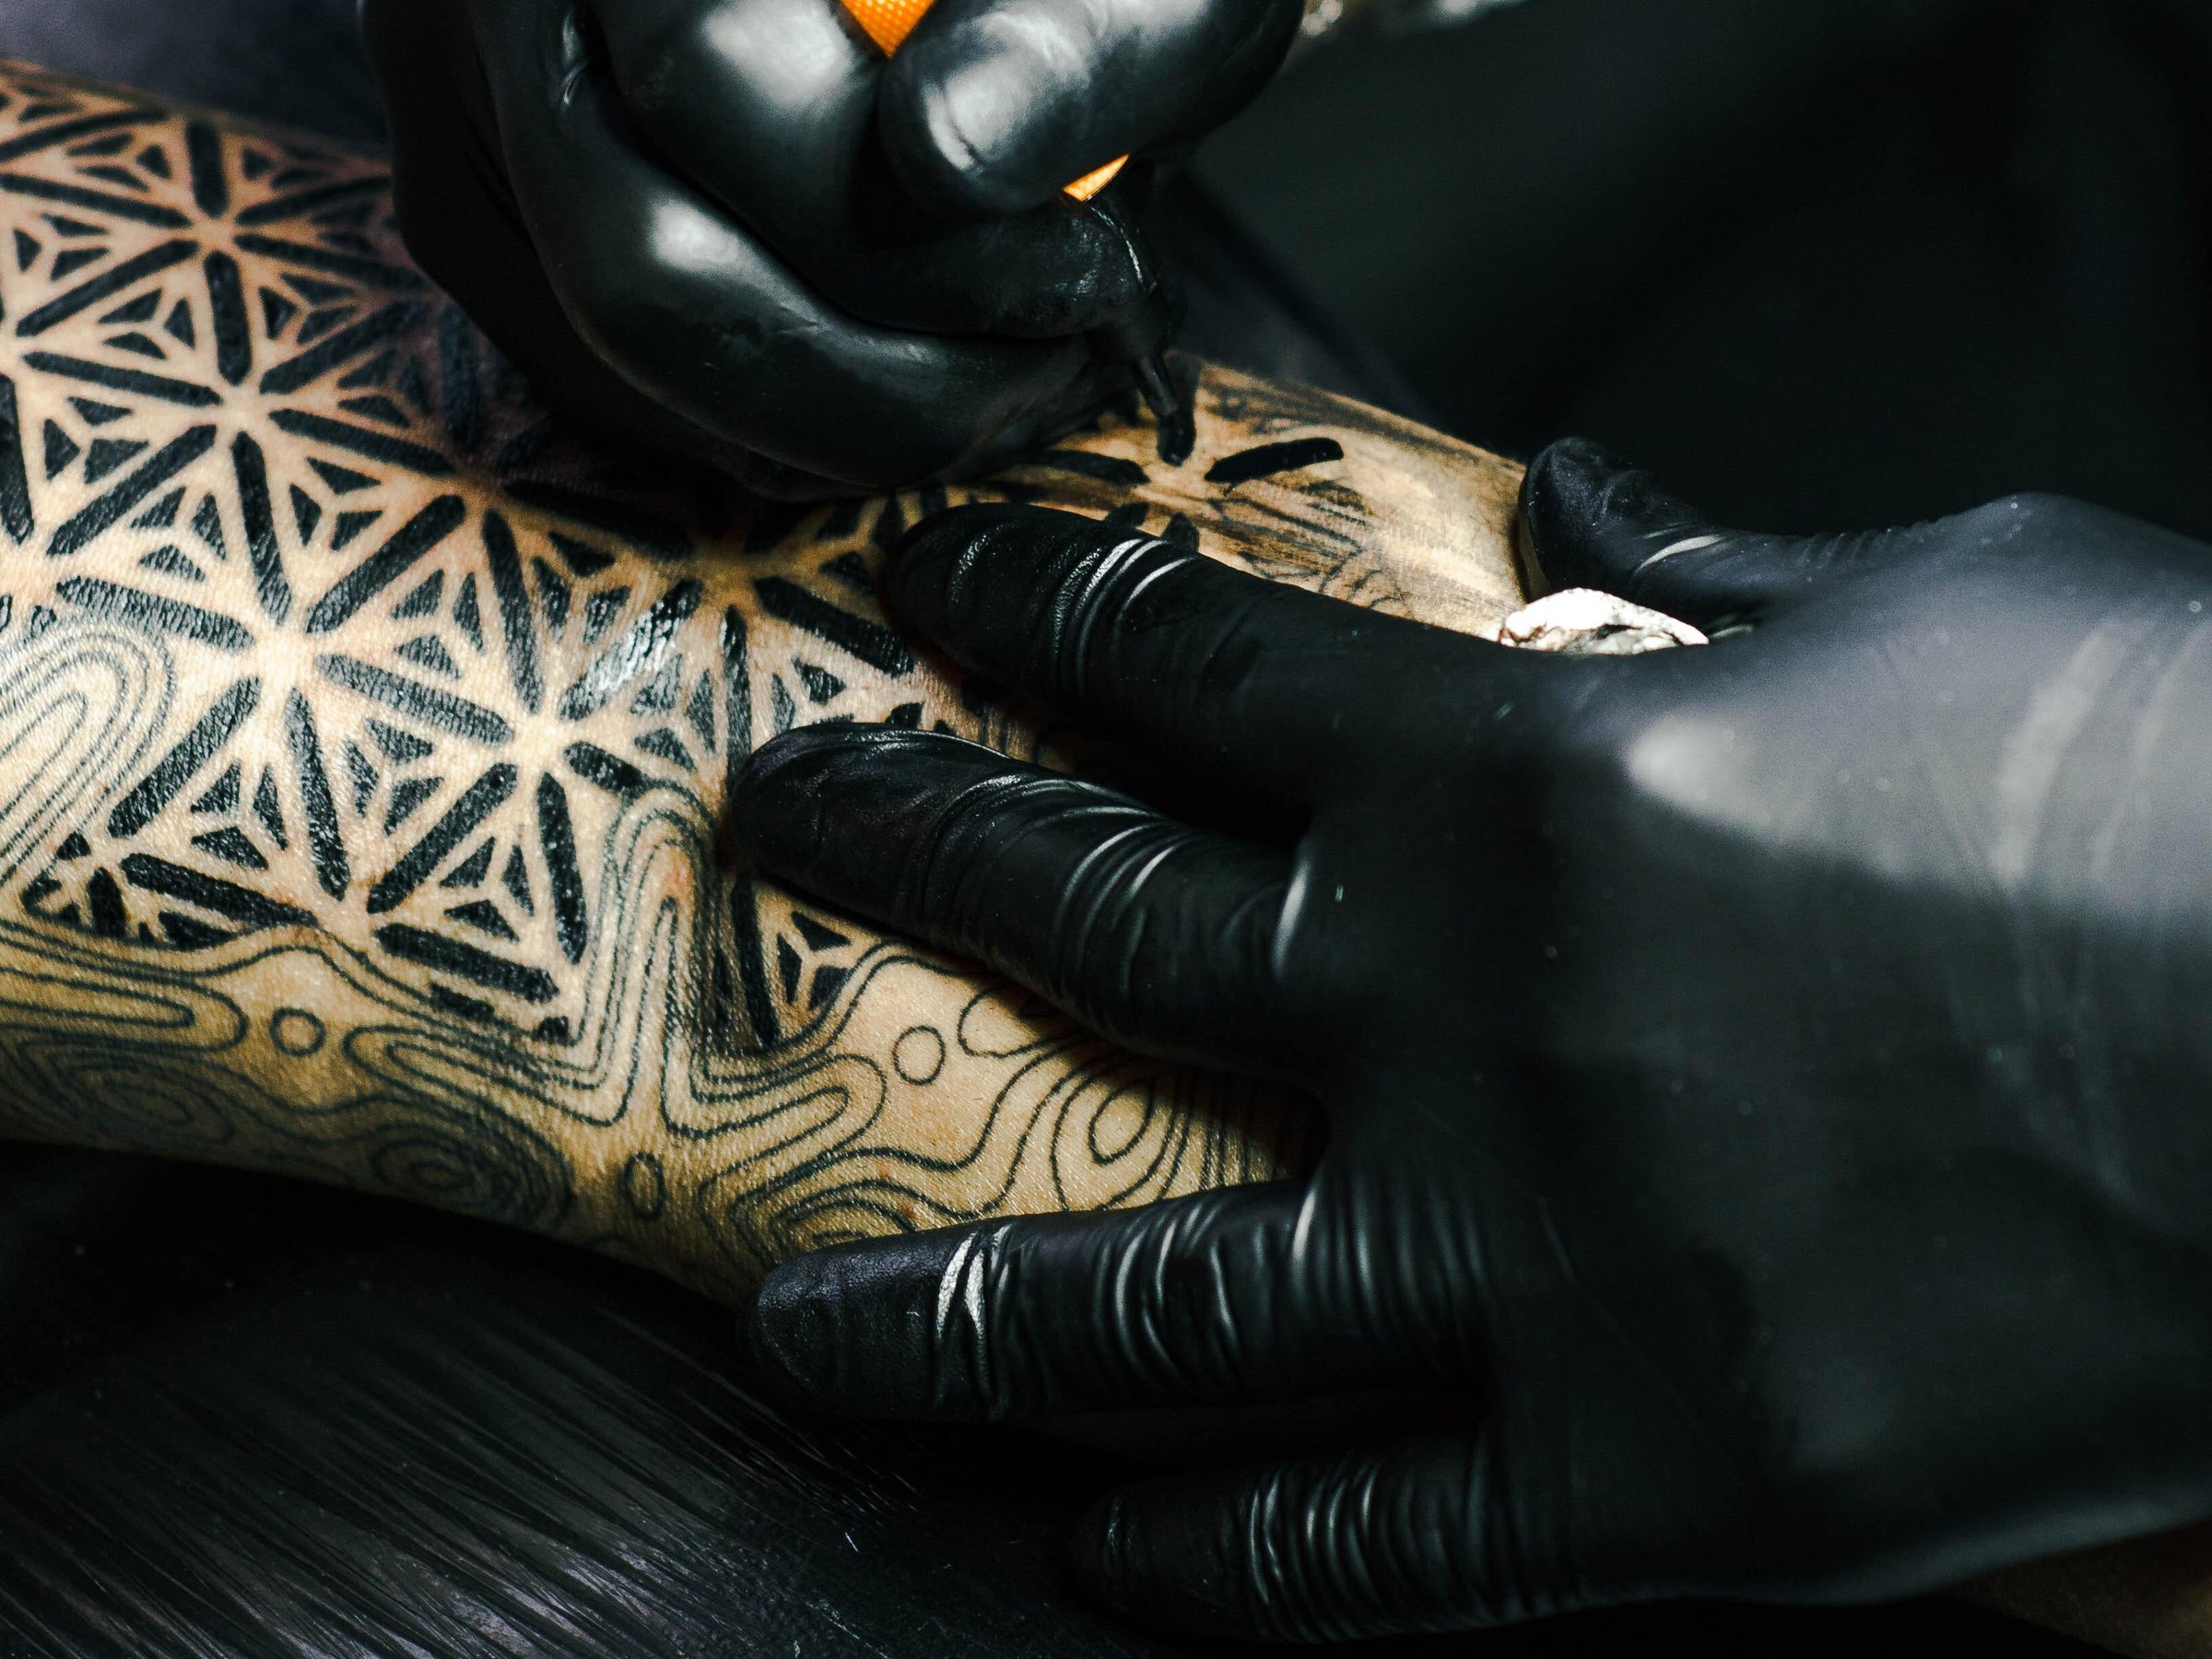 Answers to All Your 'How to Become a Tattoo Artist' Questions